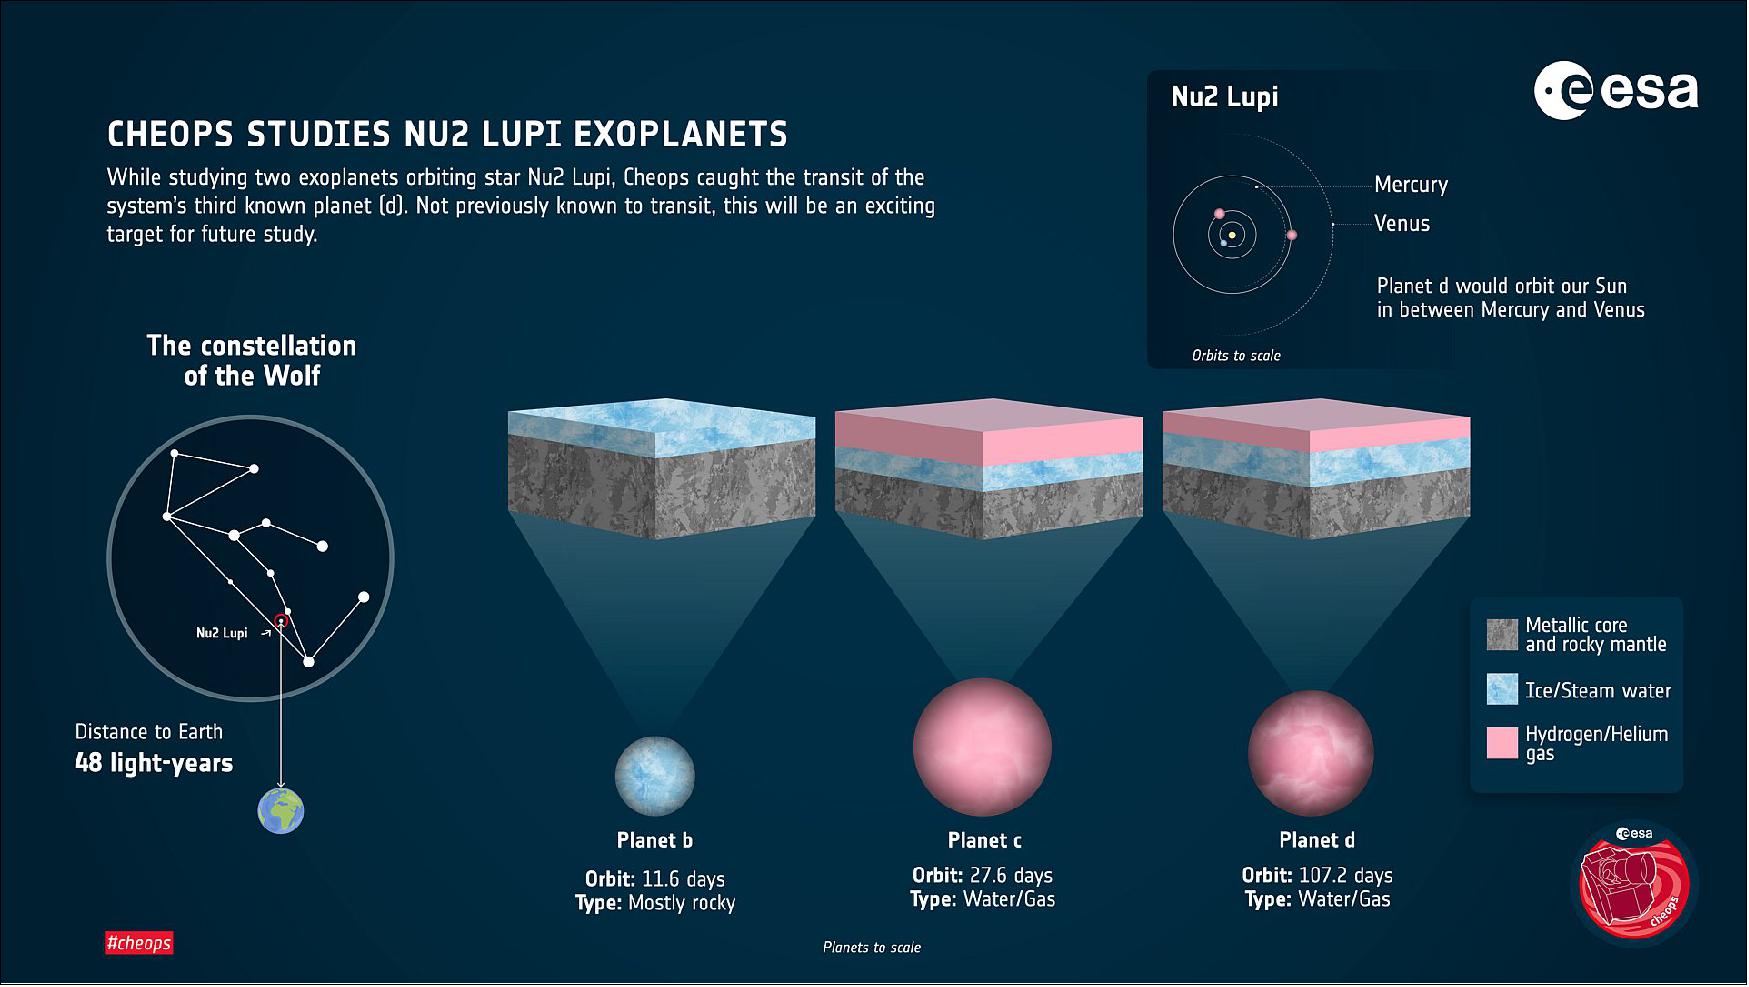 Figure 18: This infographic reveals the details of the Nu2 Lupi planetary system, which was recently explored by ESA’s exoplanet watcher Cheops. - This bright, Sun-like star is located just under 50 light-years away from Earth in the constellation of Lupus (the Wolf), as shown to the left of the frame, and is known to host three planets (named ‘b’, ‘c’ and ‘d’, with the star deemed to be object ‘A’). The relative sizes, orbital periods, and possible compositions of these three planets are depicted to the centre and lower right of the frame, while planet d’s comparative position within our Solar System is shown to the upper right (as defined by the amount of incident light it receives from its star, Nu2 Lupi), - Cheops explored this planetary system to better characterize its two inner planets, b and c, as these were known to pass in front of their host star (a ‘transit’). However, while doing so, Cheops unexpectedly spotted planet d also transiting Nu2 Lupi – the first time an exoplanet with a period of over 100 days has been spotted transiting a star bright enough to be visible to the naked eye. -Transits create the valuable opportunity to study a planet’s atmosphere, orbit, size and interior, and allow scientists to compare multiple planets around the same star to understand how they have formed and evolved. The transiting behavior of all three planets of the Nu2 Lupi system enabled Cheops to refine the planetary characteristics and compositions depicted here [image credit: ESA; data: L. Delrez et al (2021)]